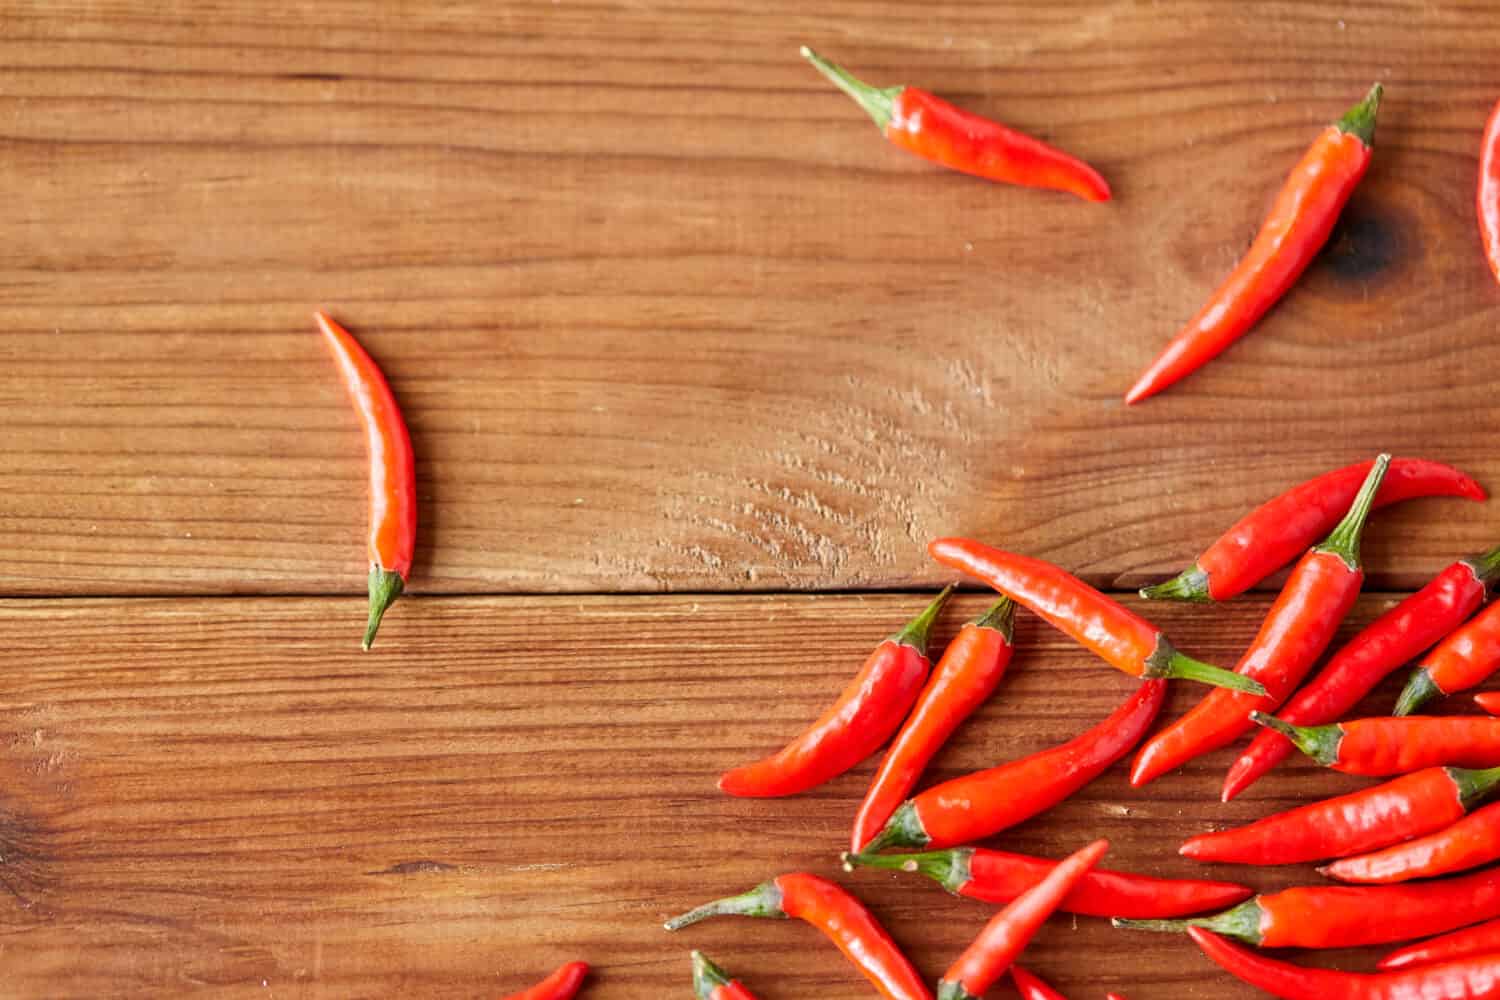 cooking, food and culinary concept - red chili or cayenne pepper on wooden boards